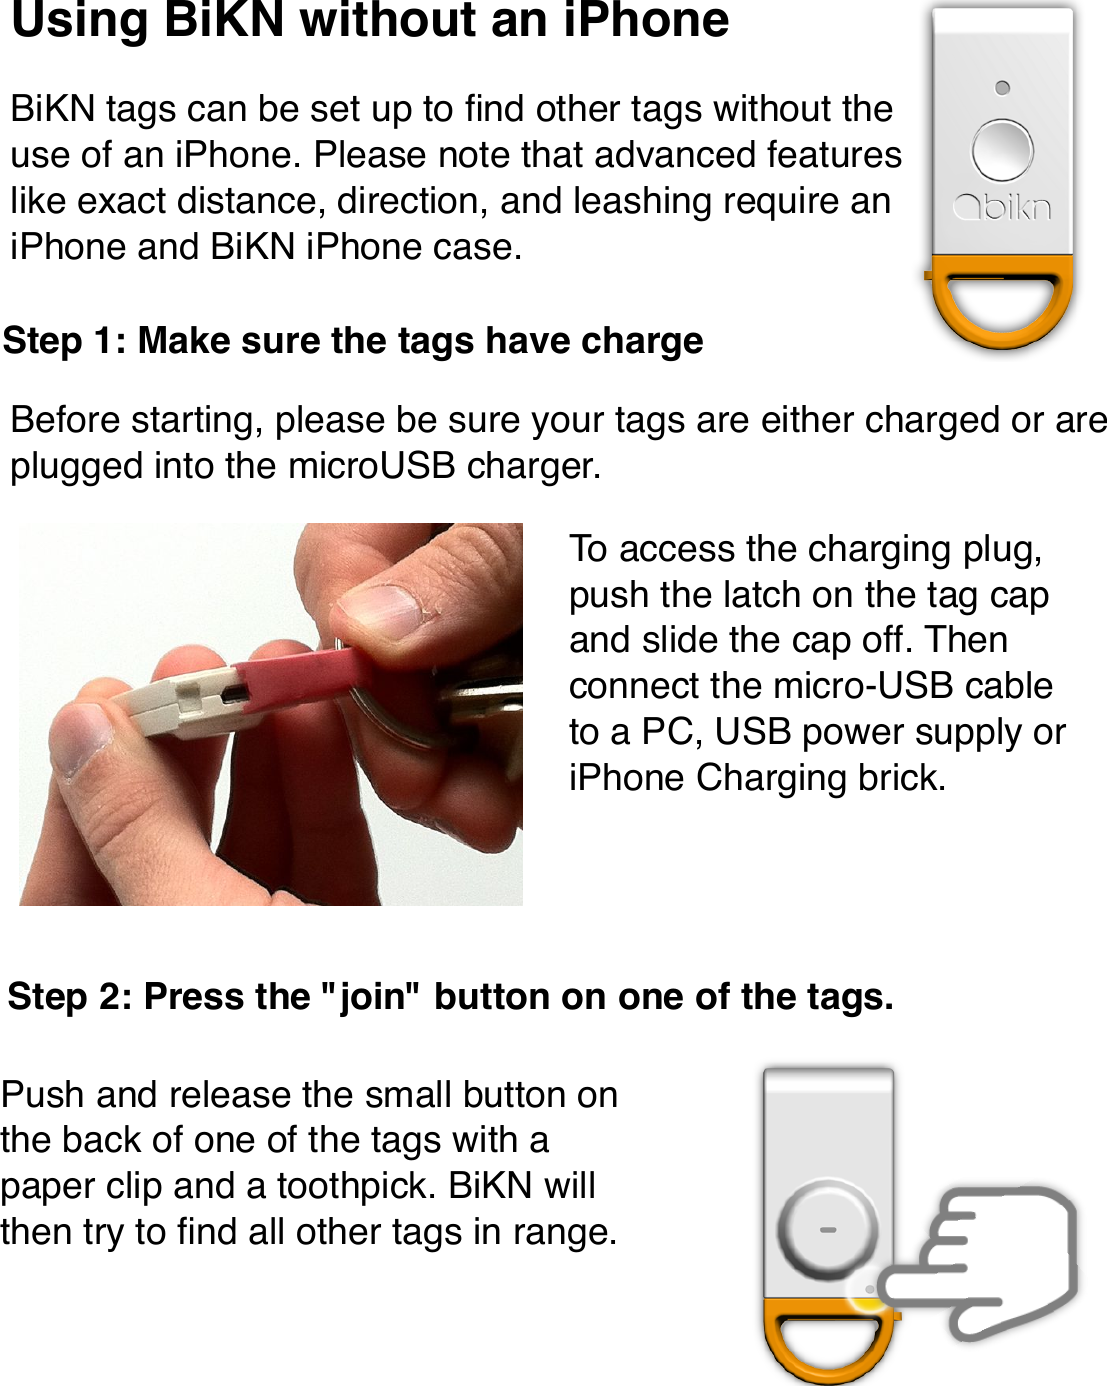 Using BiKN without an iPhoneBiKN tags can be set up to ﬁnd other tags without the use of an iPhone. Please note that advanced features like exact distance, direction, and leashing require an iPhone and BiKN iPhone case.Before starting, please be sure your tags are either charged or are plugged into the microUSB charger.Step 1: Make sure the tags have chargeTo access the charging plug, push the latch on the tag cap and slide the cap off. Then connect the micro-USB cable to a PC, USB power supply or iPhone Charging brick.Step 2: Press the &quot;join&quot; button on one of the tags.Push and release the small button on the back of one of the tags with a paper clip and a toothpick. BiKN will then try to ﬁnd all other tags in range.